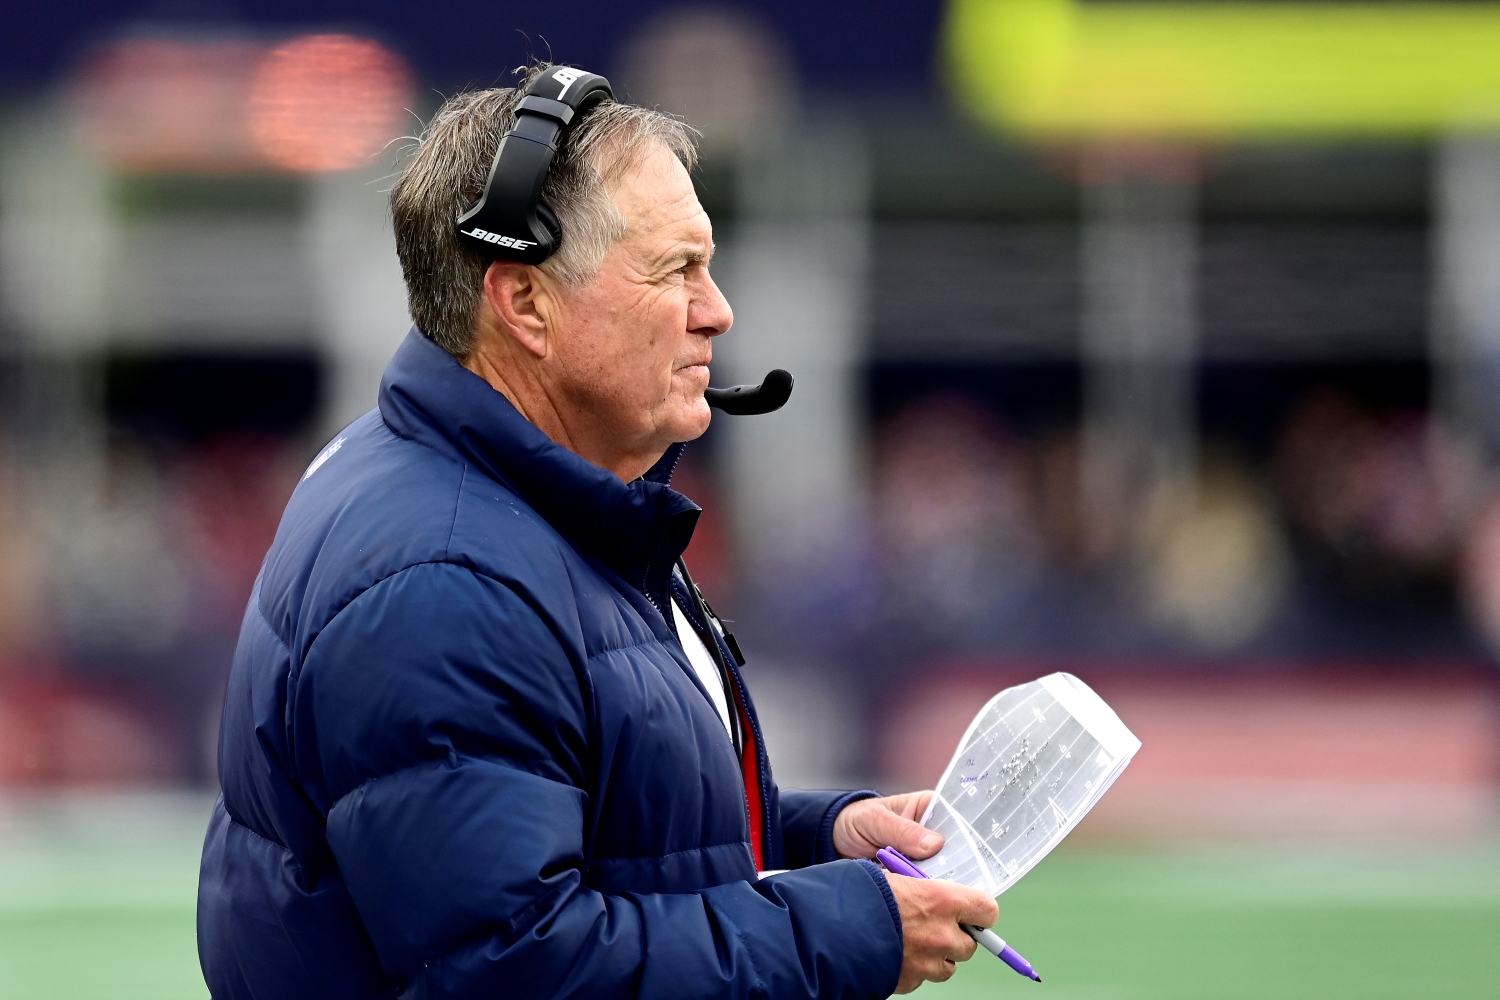 New England Patriots head coach Bill Belichick looks on during a game against the Tennessee Titans.